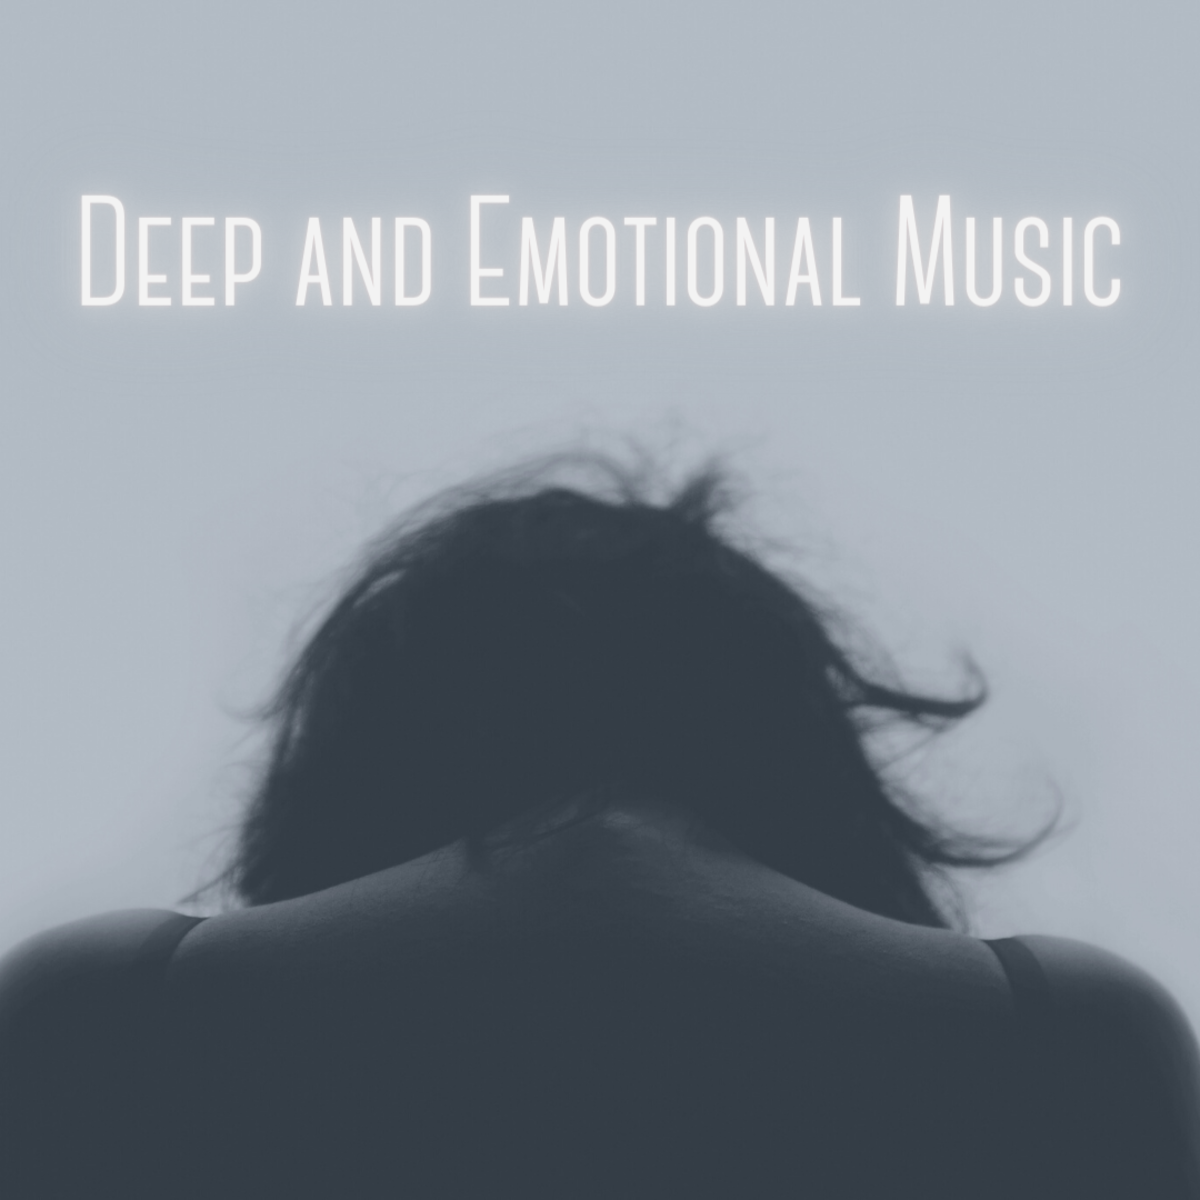 34 Beautiful, Emotional Songs to Be Sad, Reflective, Depressed, and  Melancholy to - Spinditty